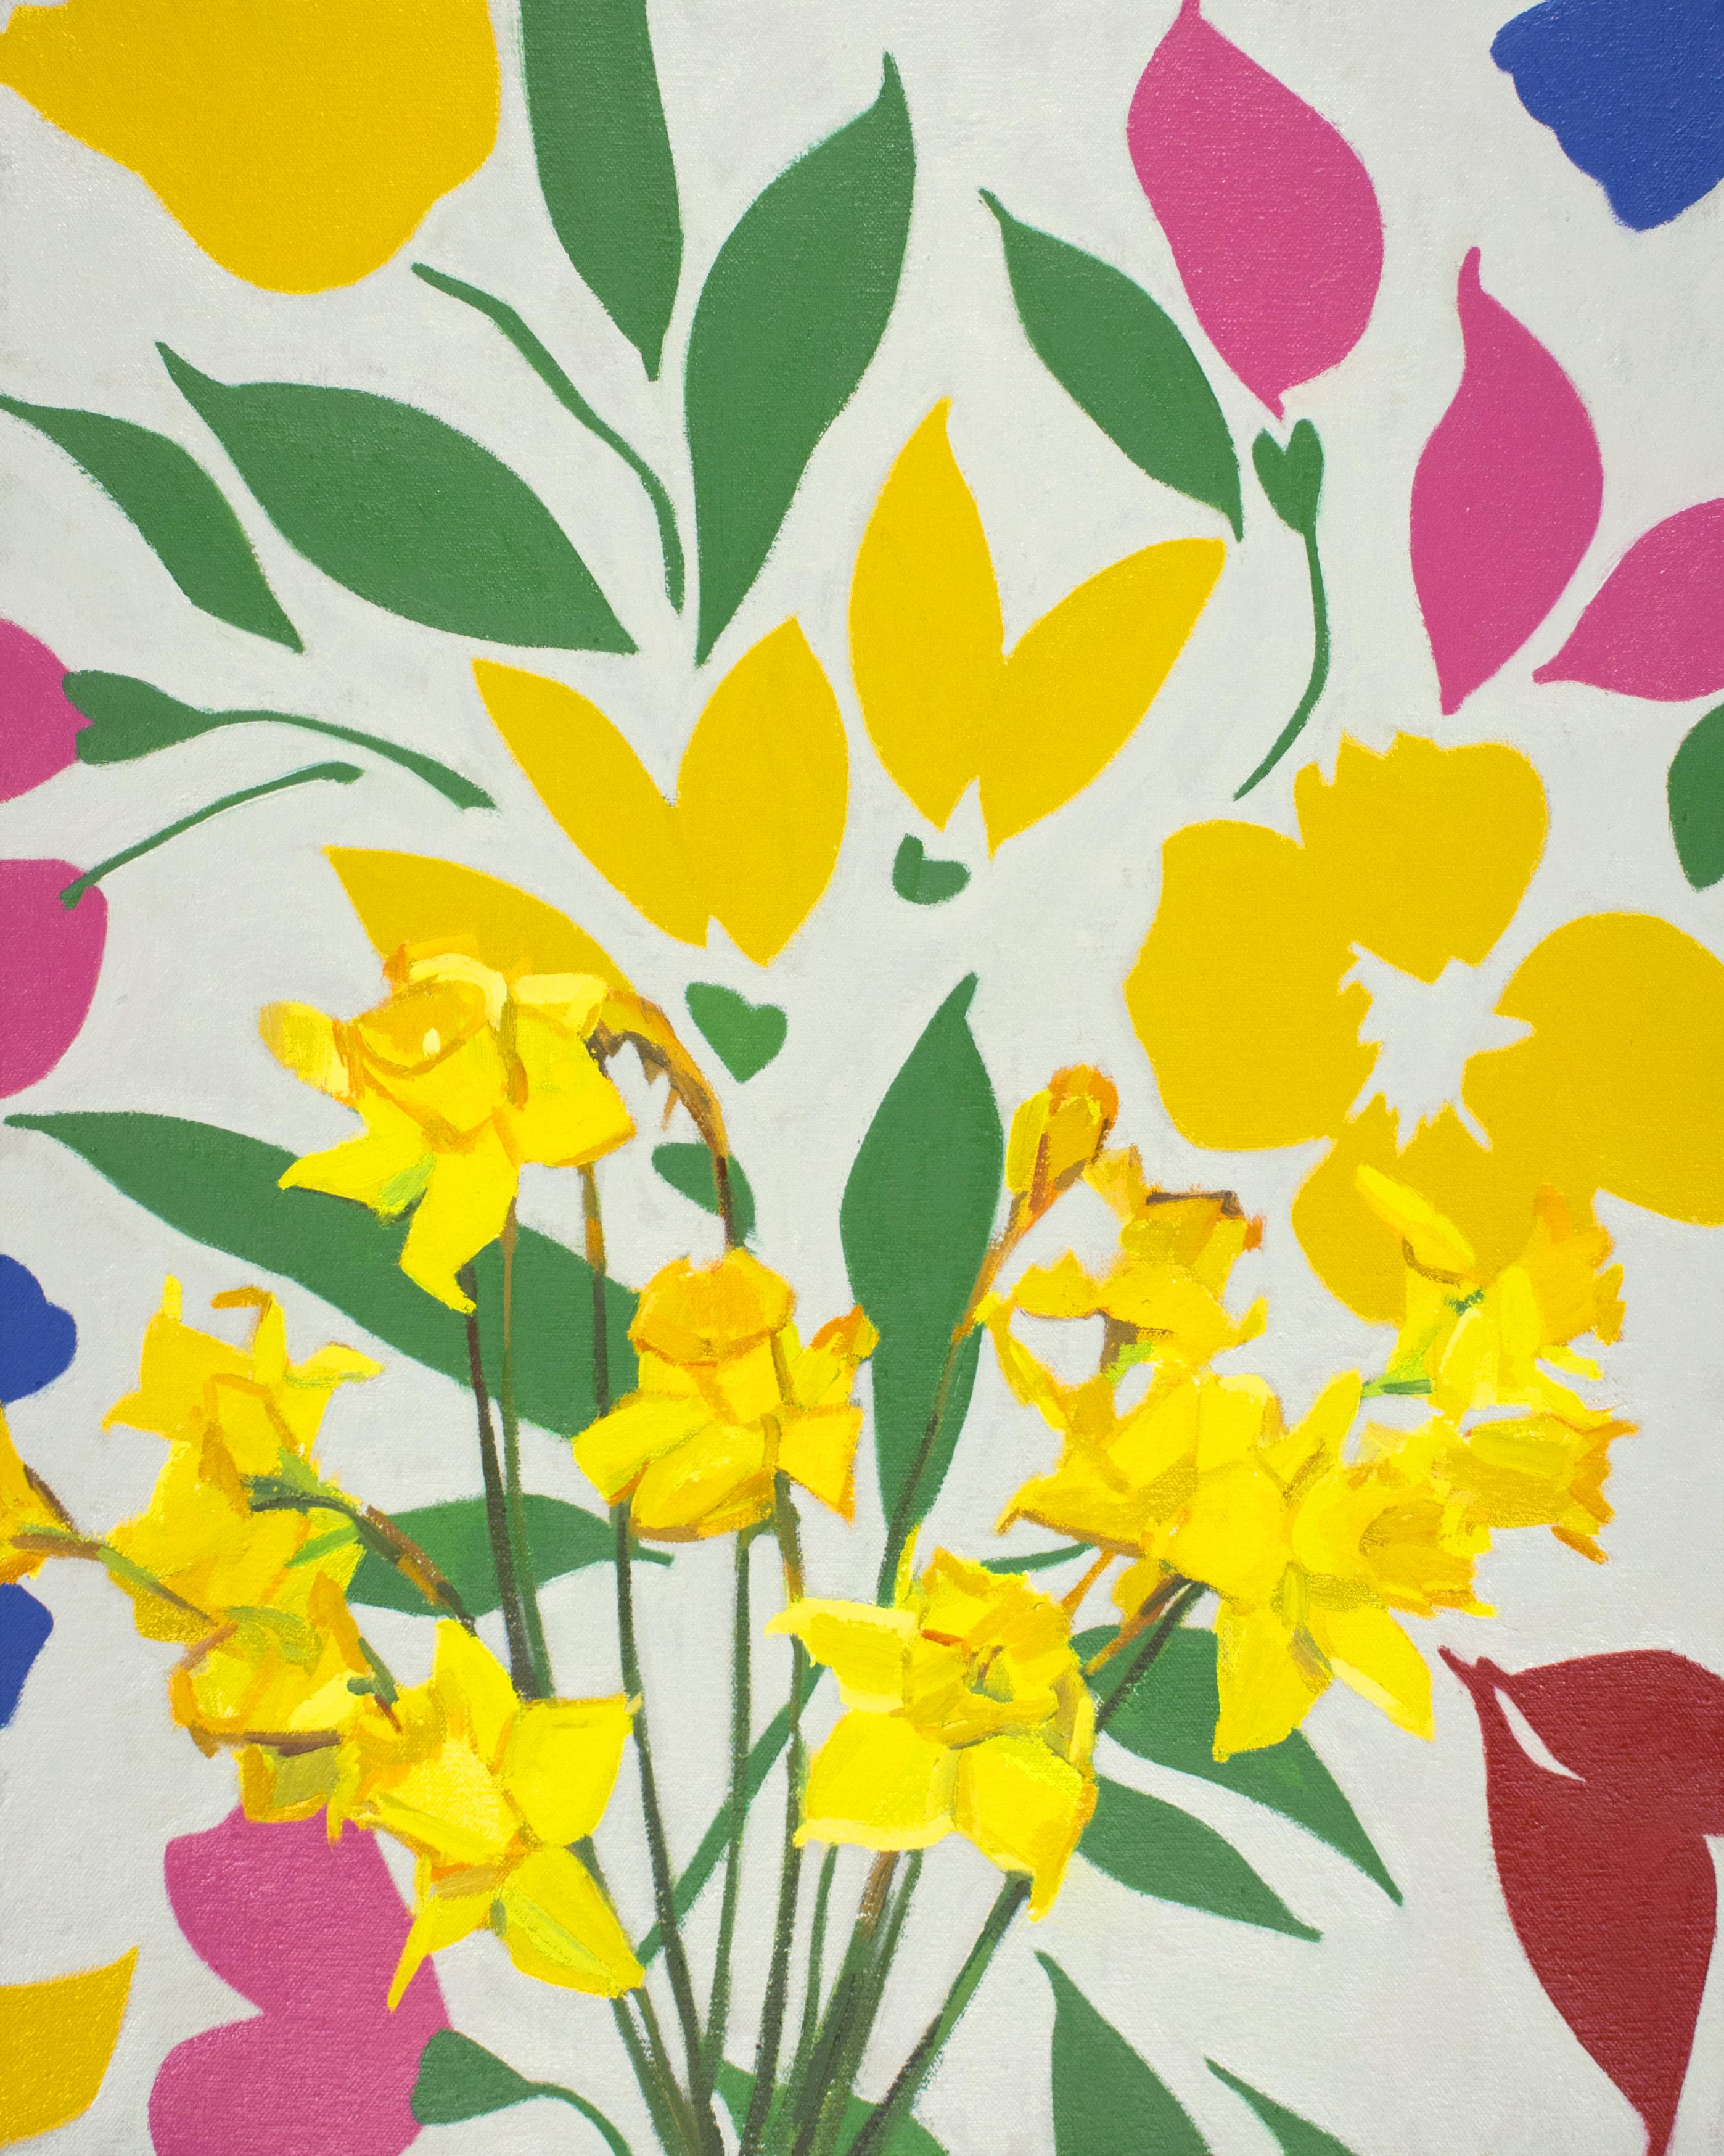 Christina Renfer Vogel Abstract Painting - 'Hopeful Daffodils' - still life - floral, botanical, pattern, bright colors